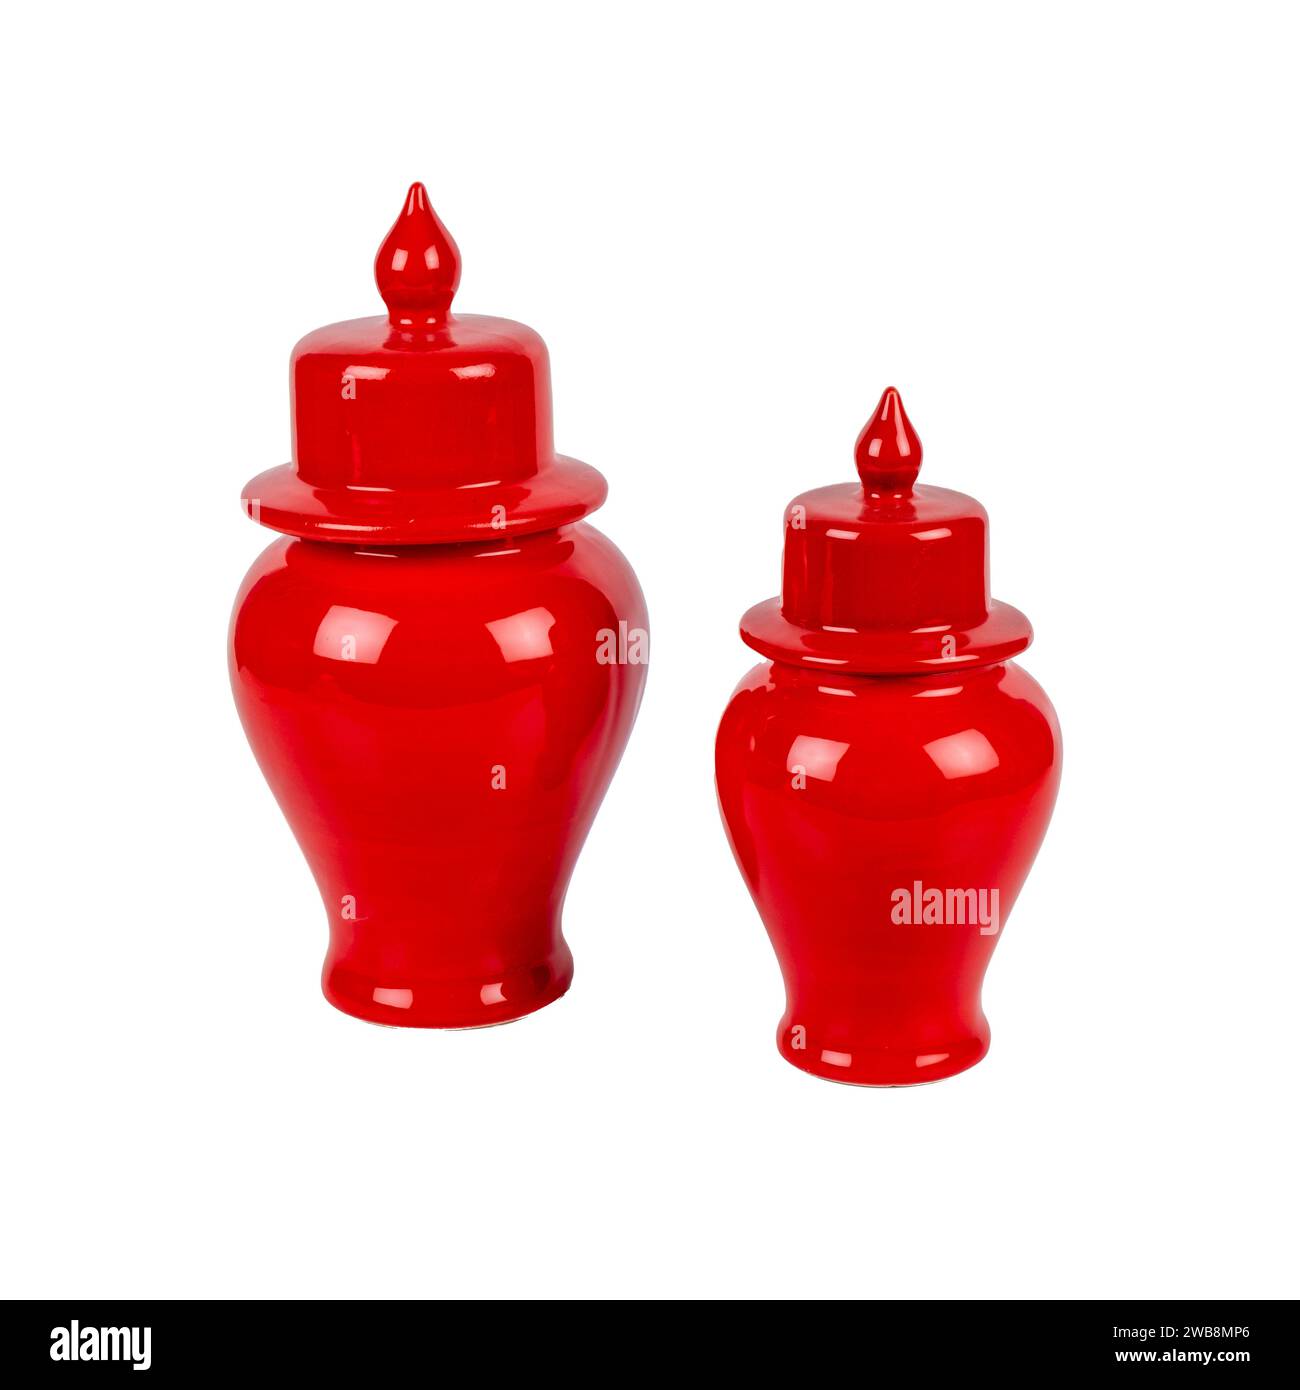 red ceramic jars luxury living room decoration object isolated Stock Photo